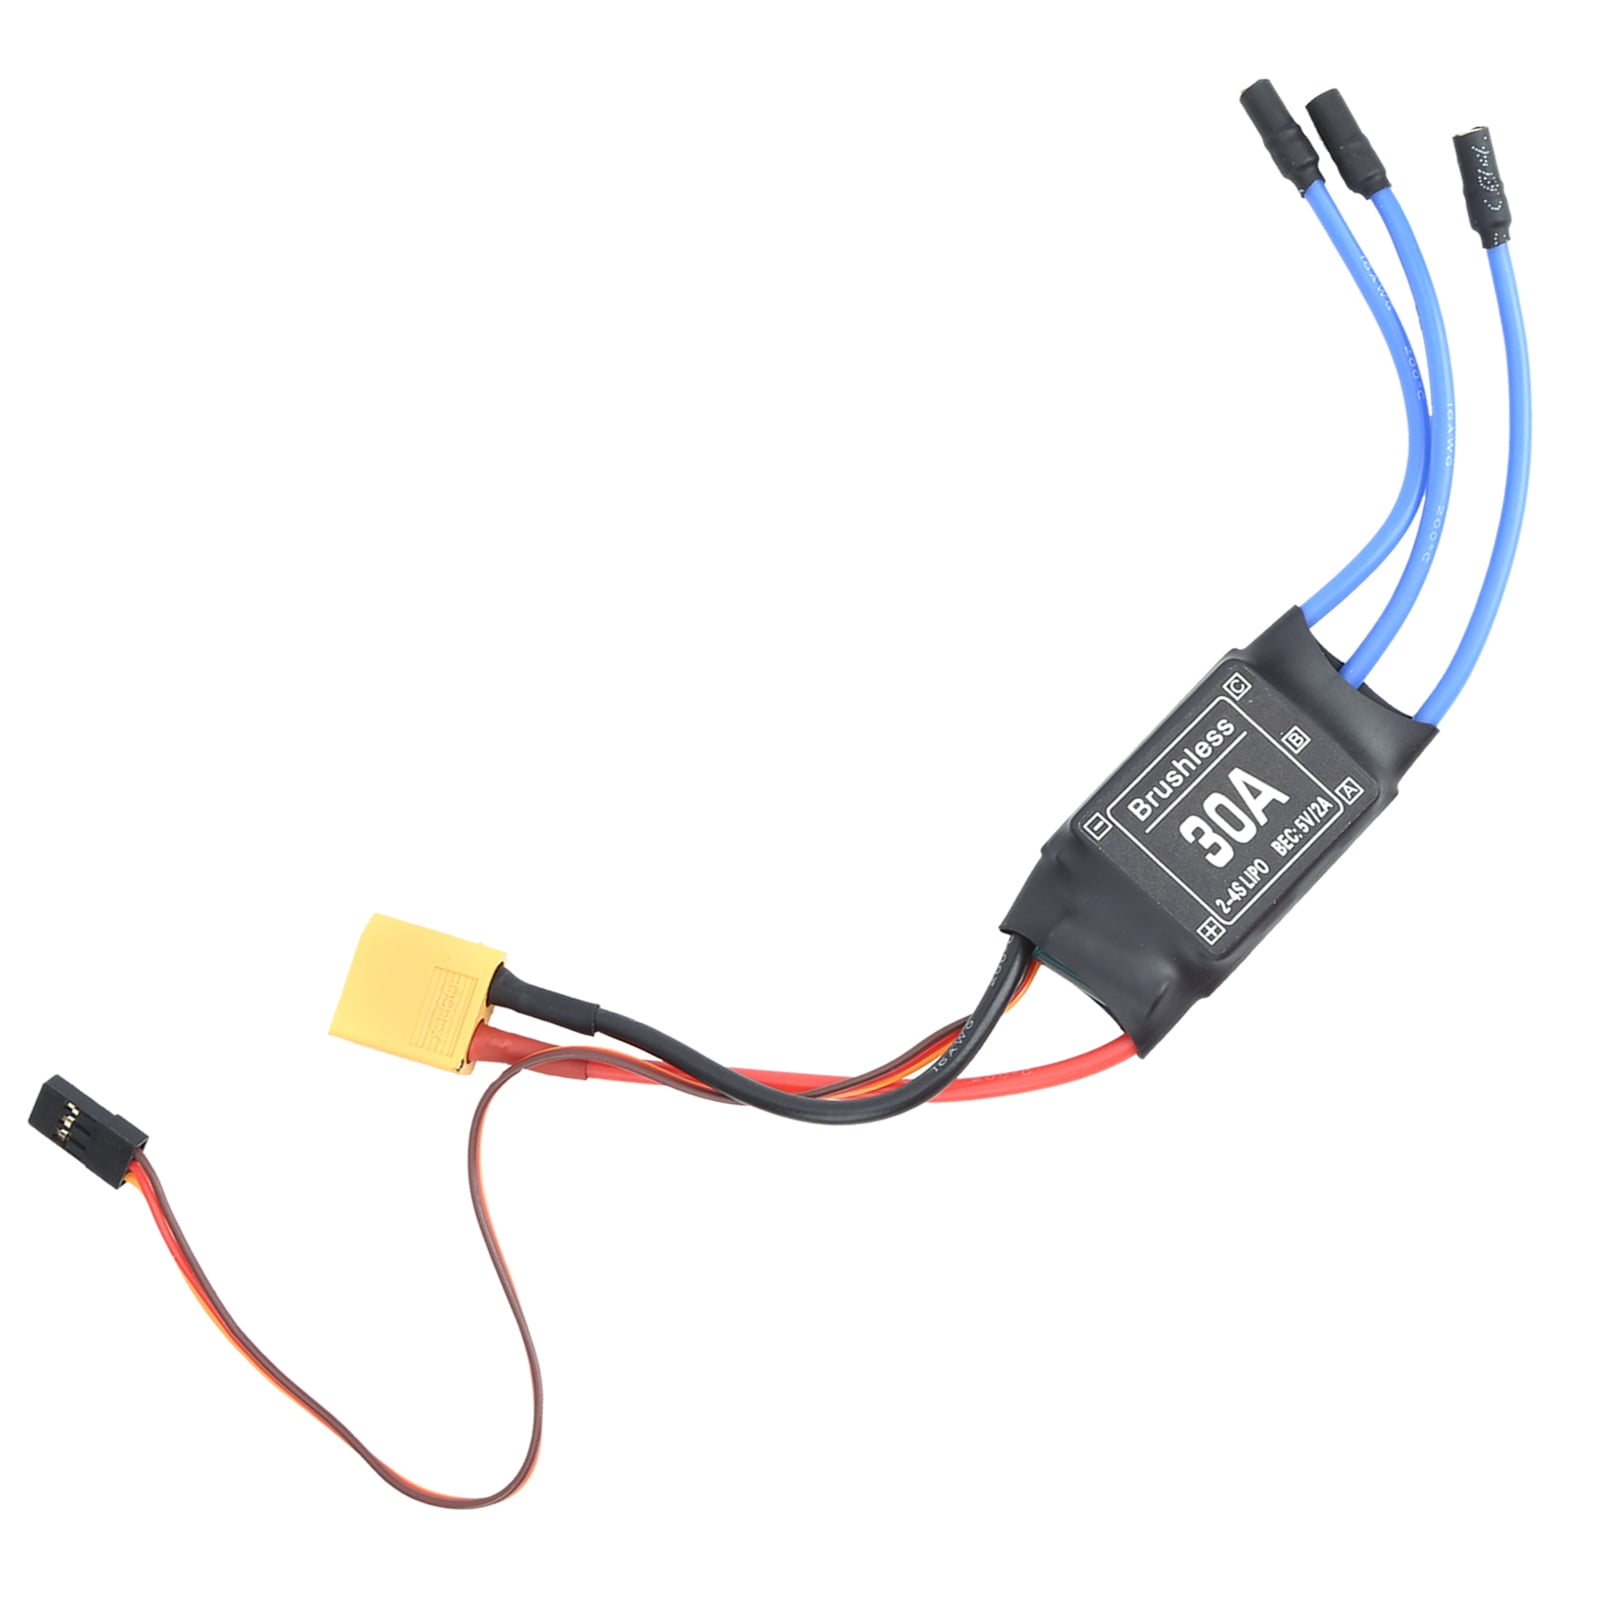 Brushless ESC Electric Speed Controller Regulator Remote Control fr RC Accessory